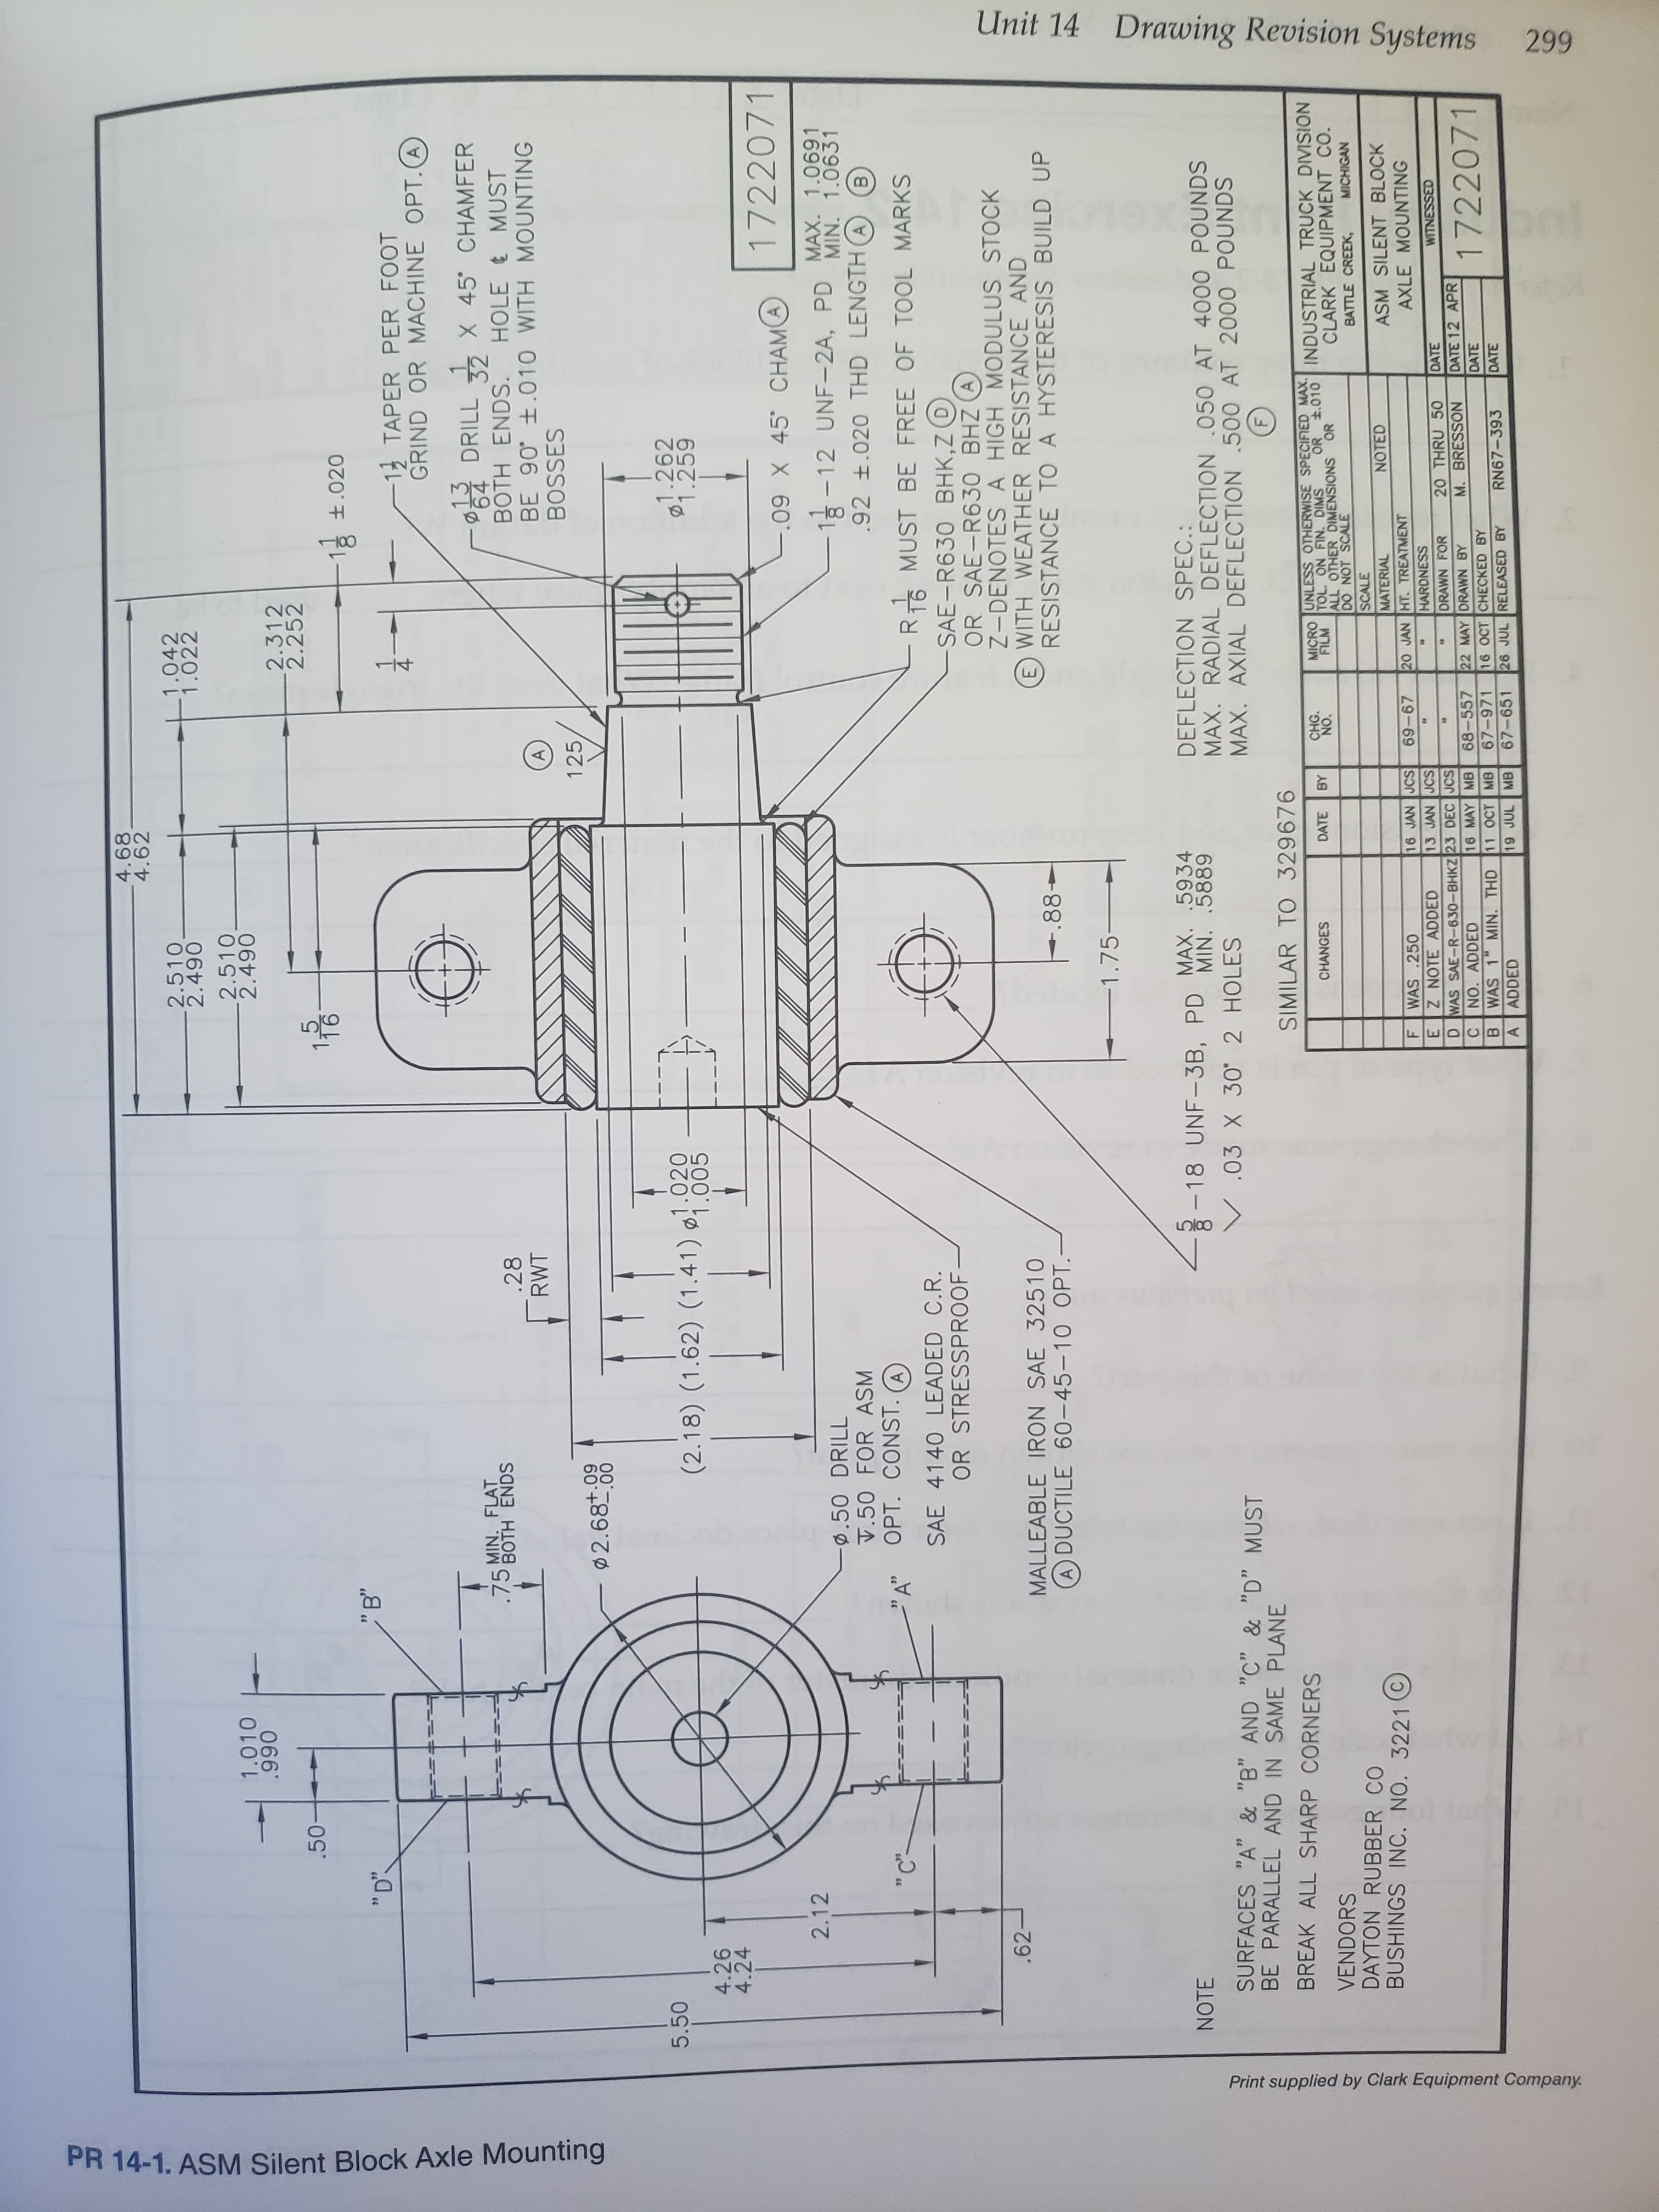 Unit 14
Drawing Revision Systems
299
14
Print supplied by Clark Equipment Company
PR 14-1. ASM Silent Block Axle Mounting
4.68
4.62
2.510.
2.490
2.510
2.490
1.042
1.022
1.010
2.312
2.252
0
-1 t.020
" B"
-12 TAPER PER FOOT
GRIND OR MACHINE OPT.A
MIN. FLAT
.75 BOTH ENDS
DDRILL X 45 CHAMFER
32
HOLE tMUST
.28
RWT
BOTH ENDS.
BE 90 t.010 WITH MOUNTING
BOSSES
A
125
2.68+.09
000
5.50
(2.18) (1.62) (1.41) 1.005
1.262
1.259
4.26
4.24
1722071
.09 X 45 CHAMA
2.12
-0.50 DRILL
V.50 FOR ASM
OPT. CONST.
1-12 UNF-2A, PD
.92 .020 THD LENGTH (A
MAX. 1.0691
MIN. 1.0631
"A"
A
- R MUST BE FREE OF TOOL MARKS
-SAE-R630 BHK,Z D
OR SAE-R630 BHZ A
Z-DENOTESA HIGH MODULUS STOCK
E WITH WEATHER RESISTANCE AND
RESISTANCE TO A HYSTERESIS BUILD UP
SAE 4140 LEADED C.R.
OR STRESSPROOF
.62
MALLEABLE IRON SAE 32510
A DUCTILE 60-45-10 OPT.
+.88
-1.75-
18 UNF-3B, PD
V.03 X 30 2 HOLES
MAX. .5934
MIN. .5889
NOTE
SURFACES "A" & "B" AND "C" & "D" MUST
BE PARALLEL AND IN SAME PLANE
DEFLECTION SPEC.:
MAX. RADIAL DEFLECTION .050 AT 4000 POUNDS
MAX. AXIAL DEFLECTION .500 AT 2000 POUNDS
BREAK ALL SHARP CORNERS
SIMILAR TO 329676
CHG.
NO.
MICRO UNLESS OTHERWISE SPECIFIED MAX.
FILM
OR 010 INDUSTRIAL TRUCK DIVISION
CLARK EQUIPMENT CO.
CHANGES
DATE
BY
VENDORS
DAYTON RUBBER CO
BUSHINGS INC. NO. 3221 C
TOL. ON FIN. DIMS
ALL OTHER DIMENSIONS
DO NOT SCALE
SCALE
MATERIAL
BATTLE CREEK,
MICHIGAN
NOTED
ASM SILENT BLOCK
20 JAN HT. TREATMENT
WAS .250
Z NOTE ADDED
D WAS SAE-R-630-BHKZ 23 DEC JCS
CNO. ADDED
WAS 1 MIN. THD
A ADDED
16 JAN JCS
AXLE MOUNTING
13 JAN JCS
HARDNESS
20 THRU 50
M. BRESSON
DATE
DATE 12 APR
DATE
DATE
DRAWN FOR
68-557
67-971
67-651
22 MAY DRAWN BY
16 OCT CHECKED BY
26 JUL RELEASED BY
16 MAY MB
1722071
11 OCT MB
RN67-393
